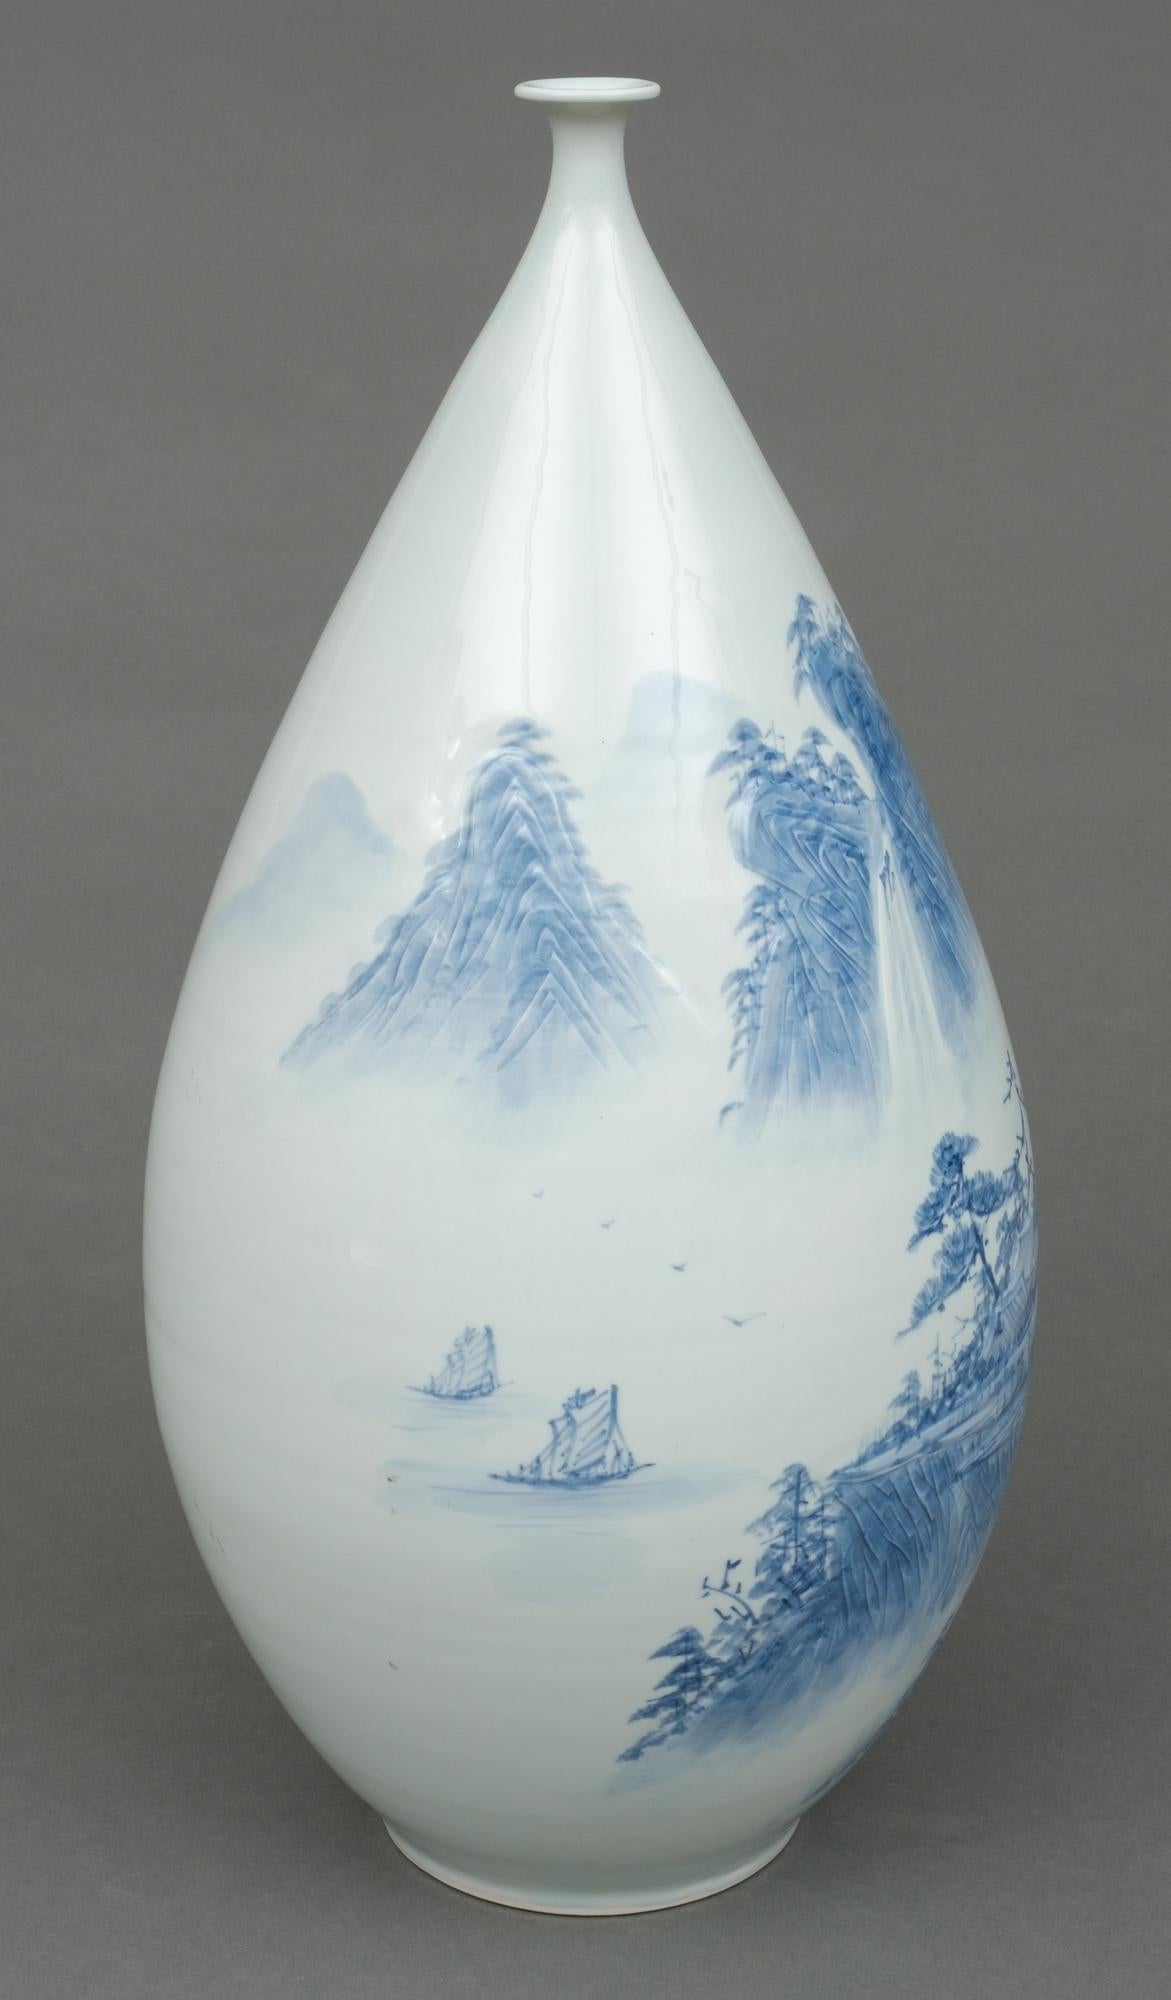 Large Japanese Ovoid Porcelain Vase with Blue & White Landscape, by Shigan 芝岩 In Good Condition For Sale In Amsterdam, NL